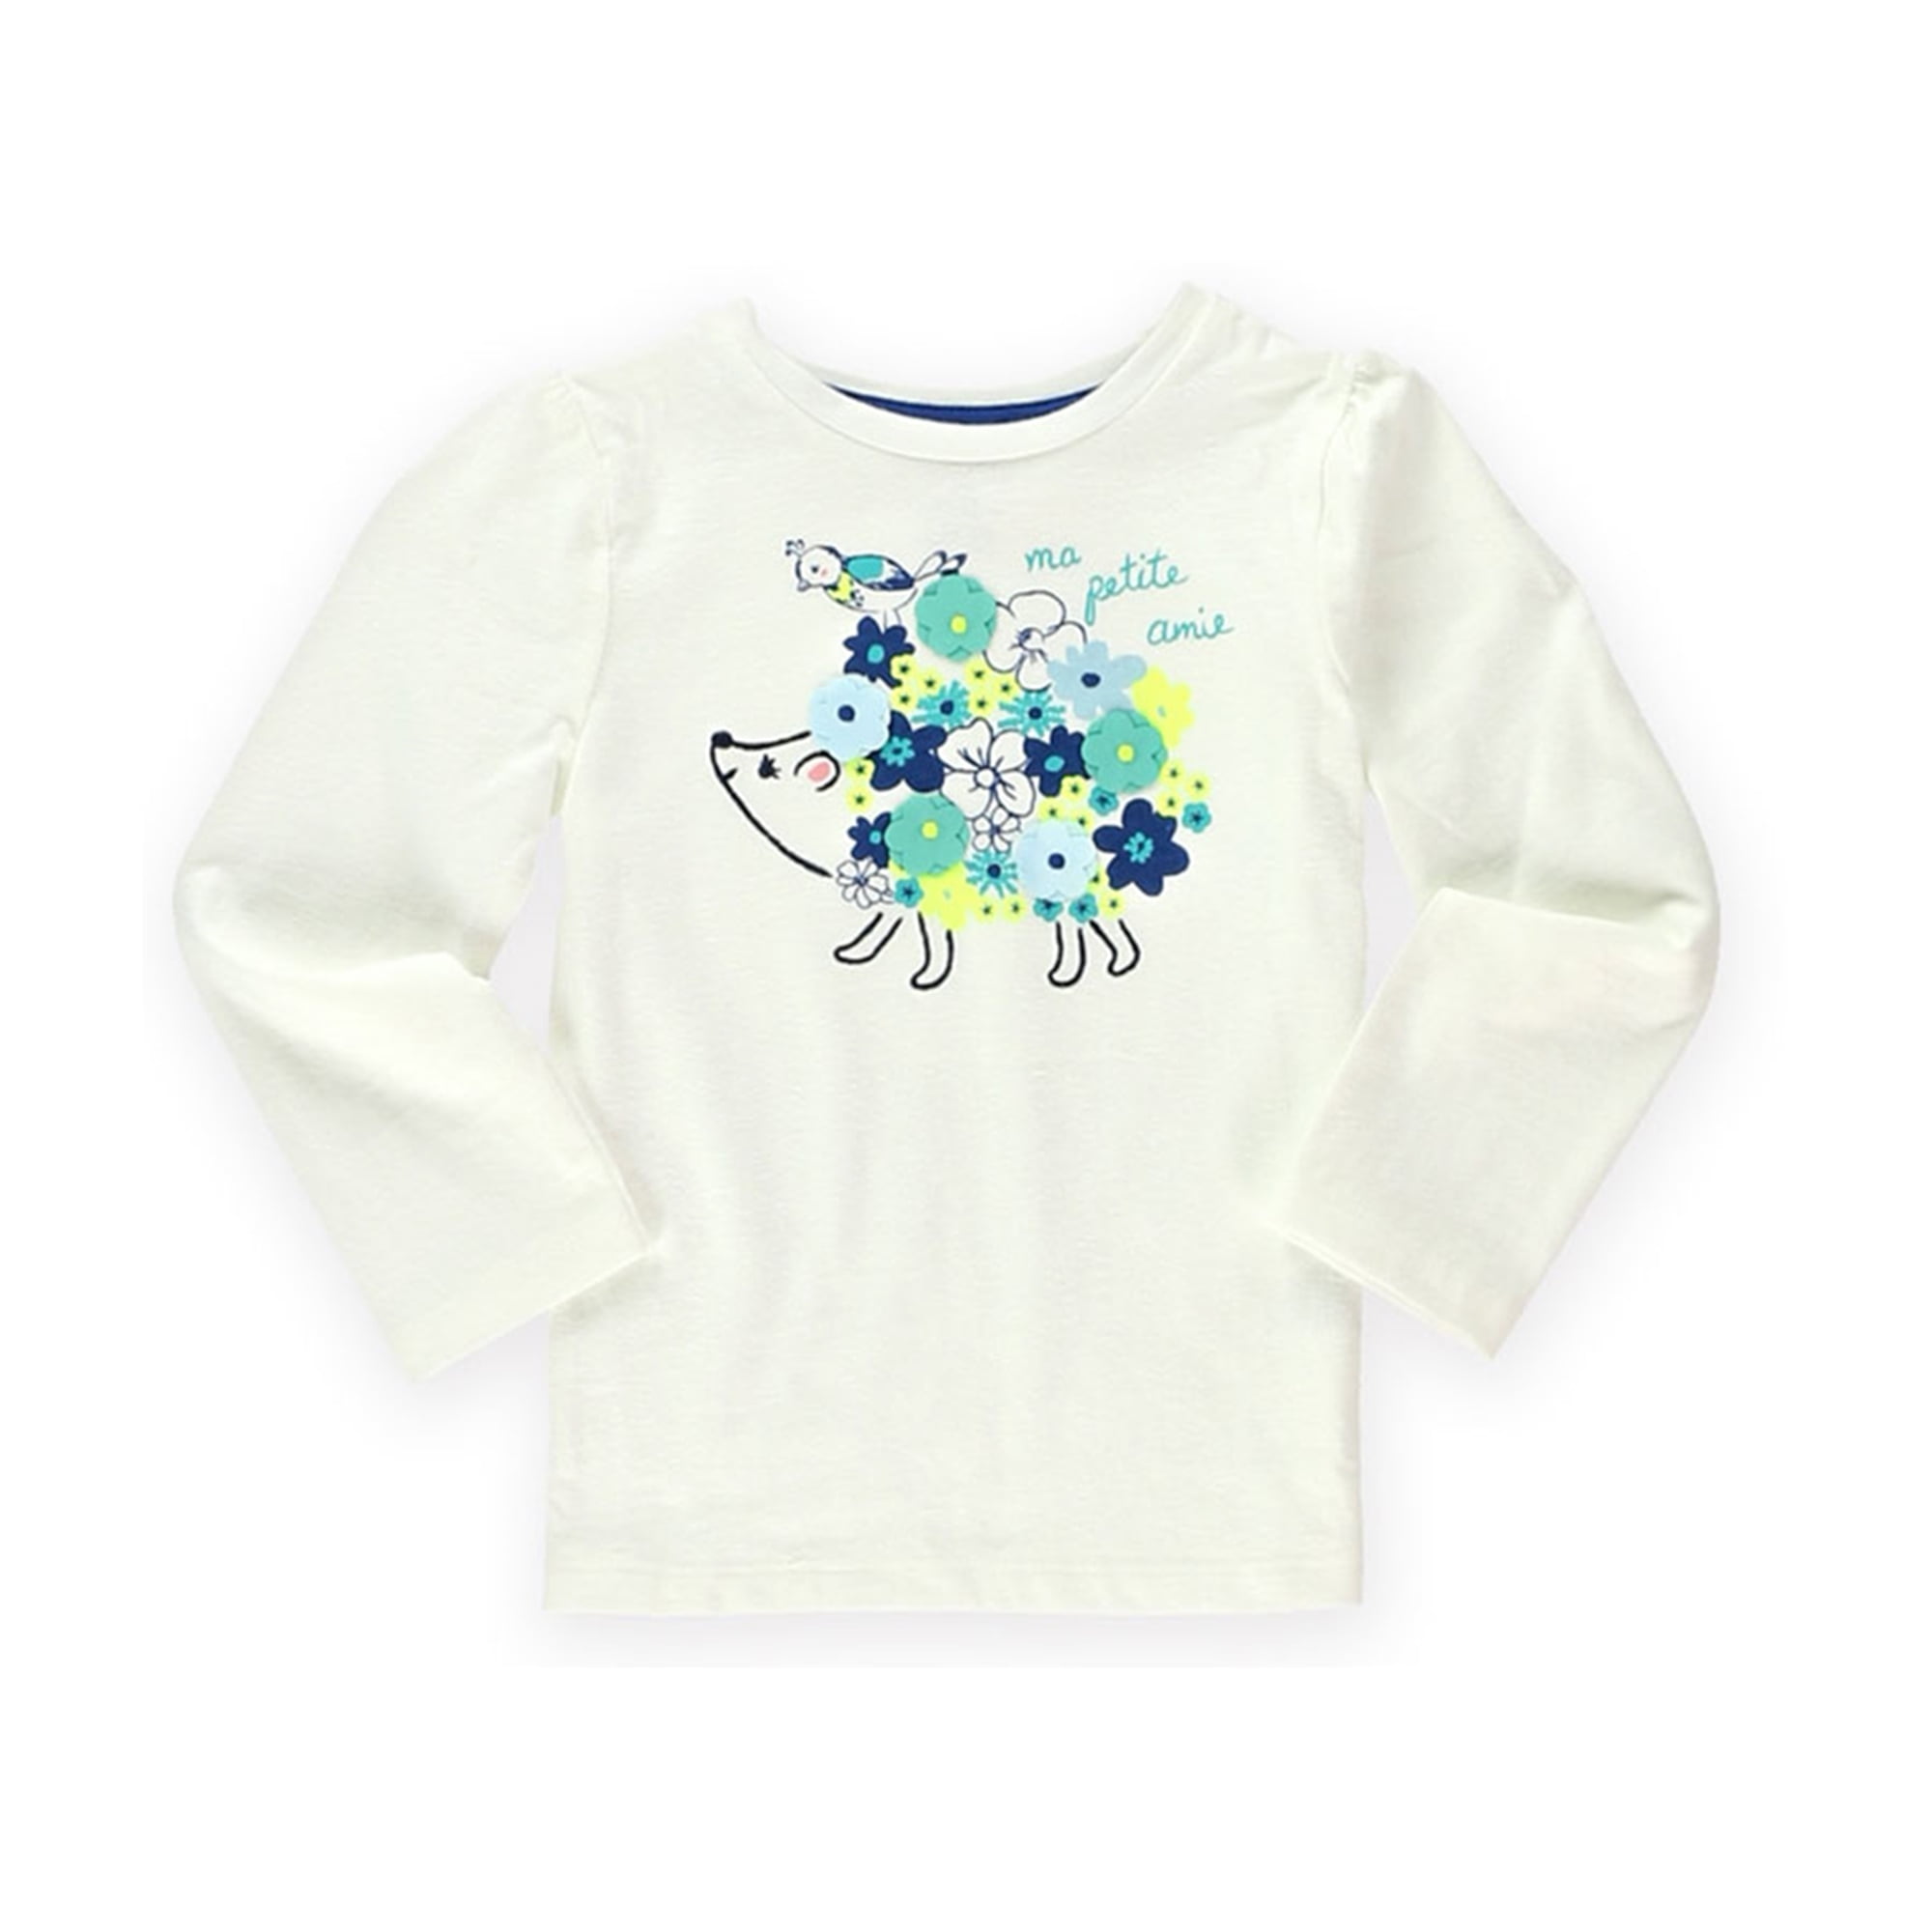 New Gymboree Girls Girl Dog Graphic Tee Top Size Small 5-6 Sky Blue 